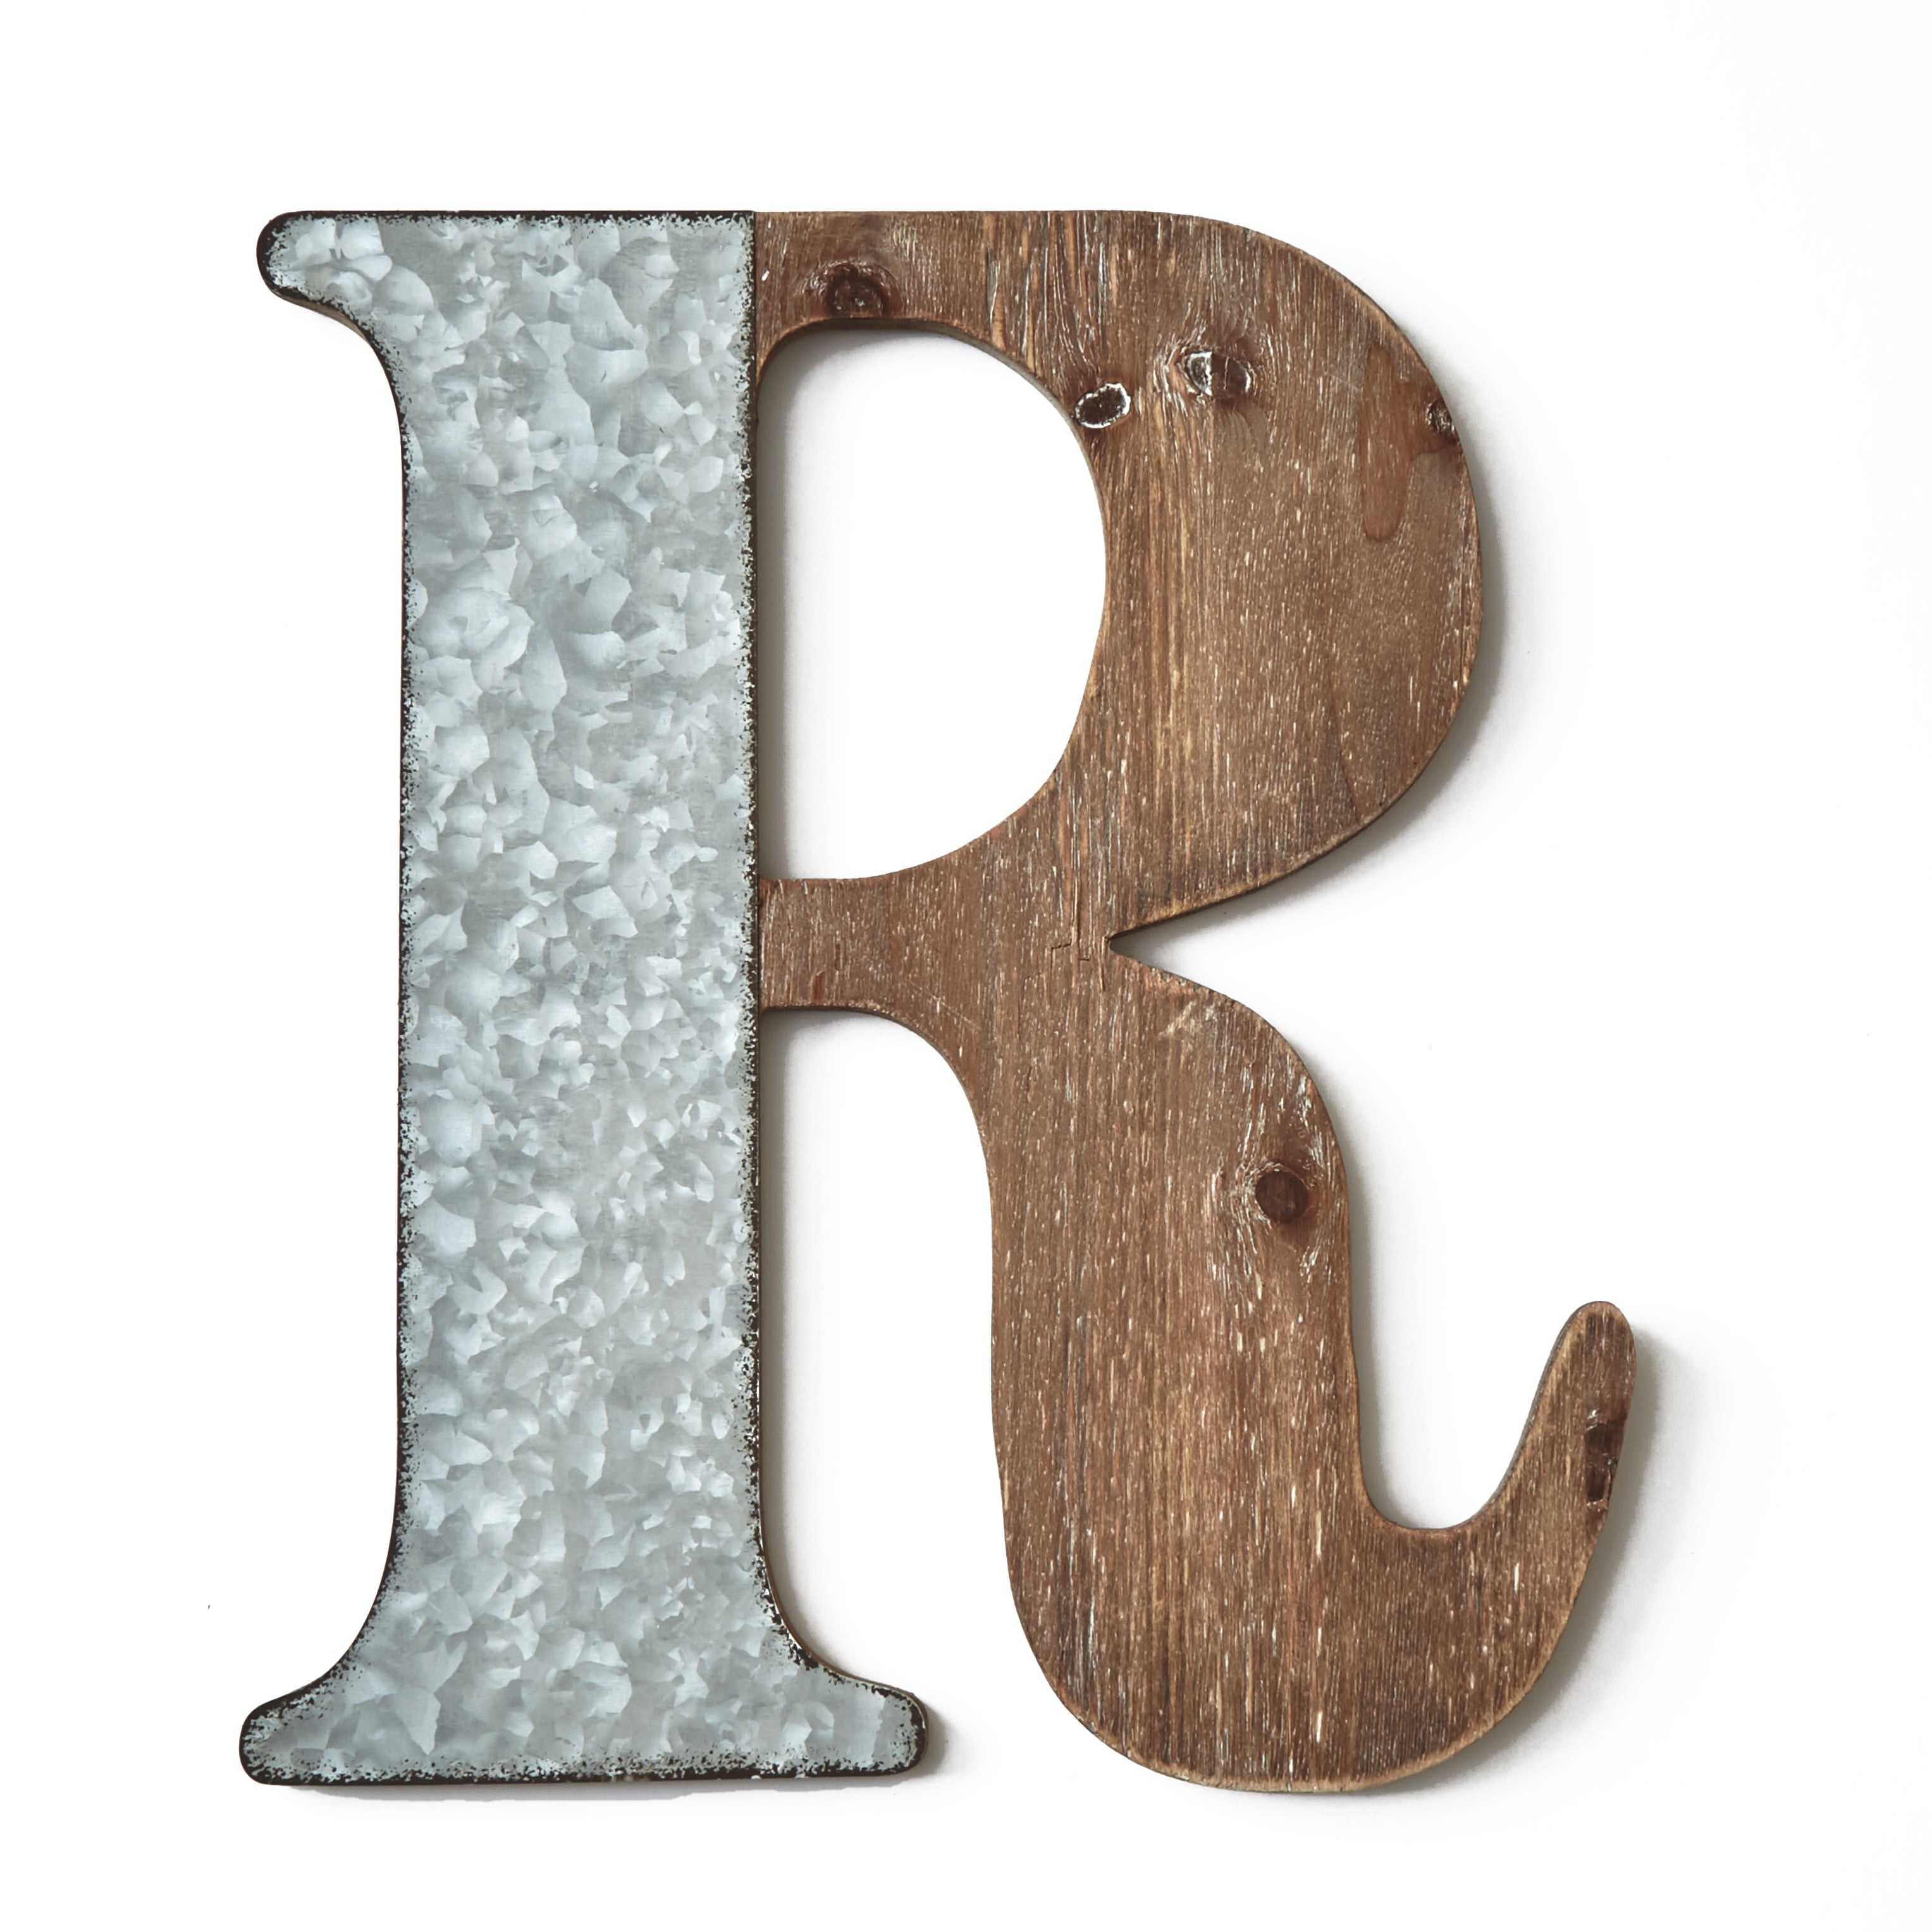 Custom Metal sign Rustic Letters Silver Letters Large Metal Decor Metal Letters Wall Letters Metal logo sign